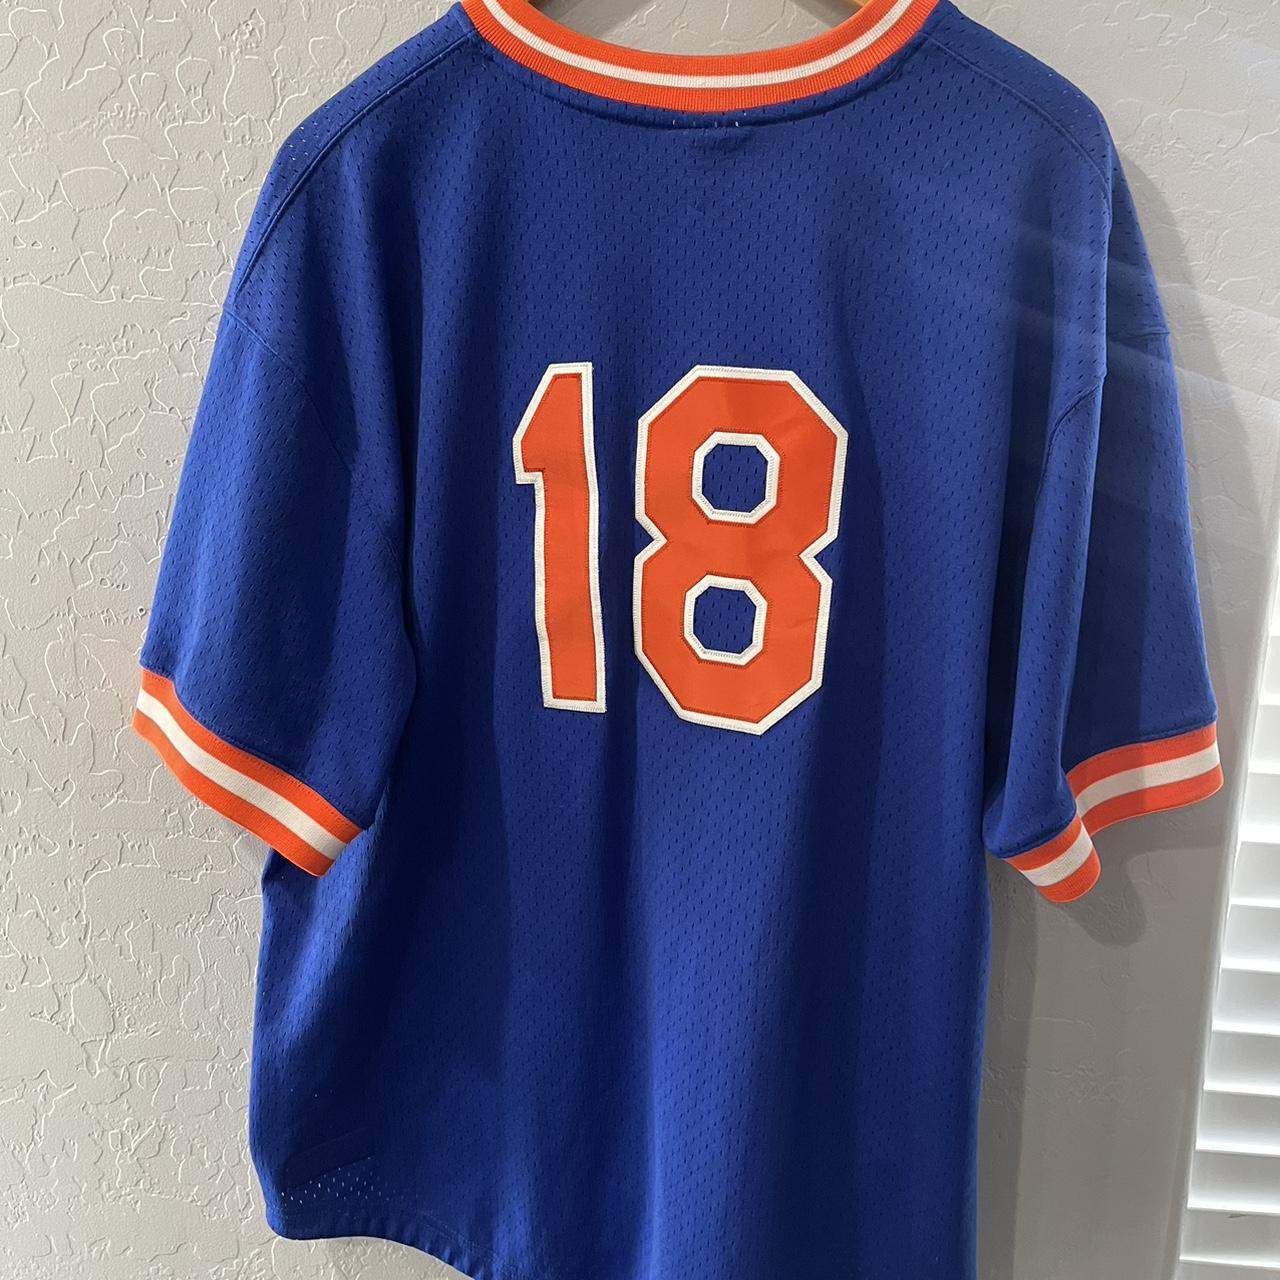 Mitchell & Ness NY Mets #18 Strawberry Cooperstown - Depop